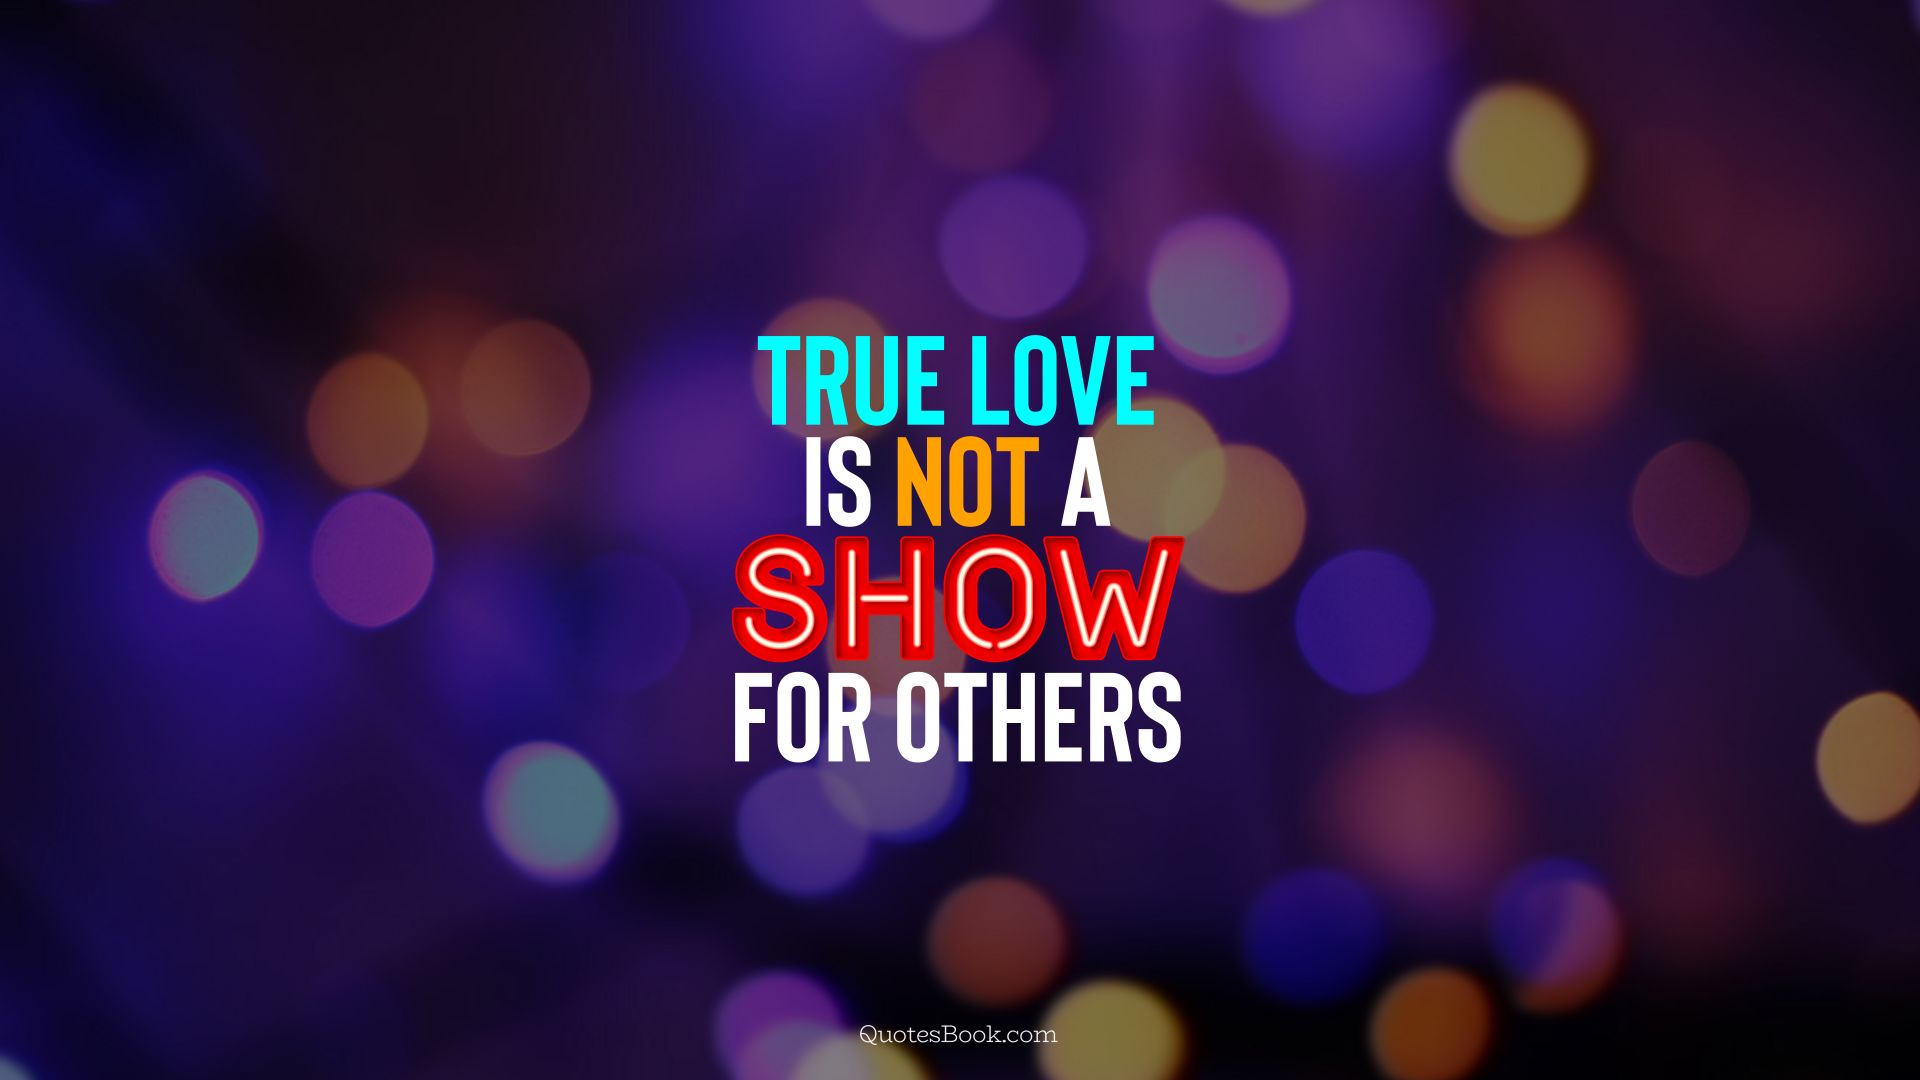 True love is not a show for others. - Quote by QuotesBook